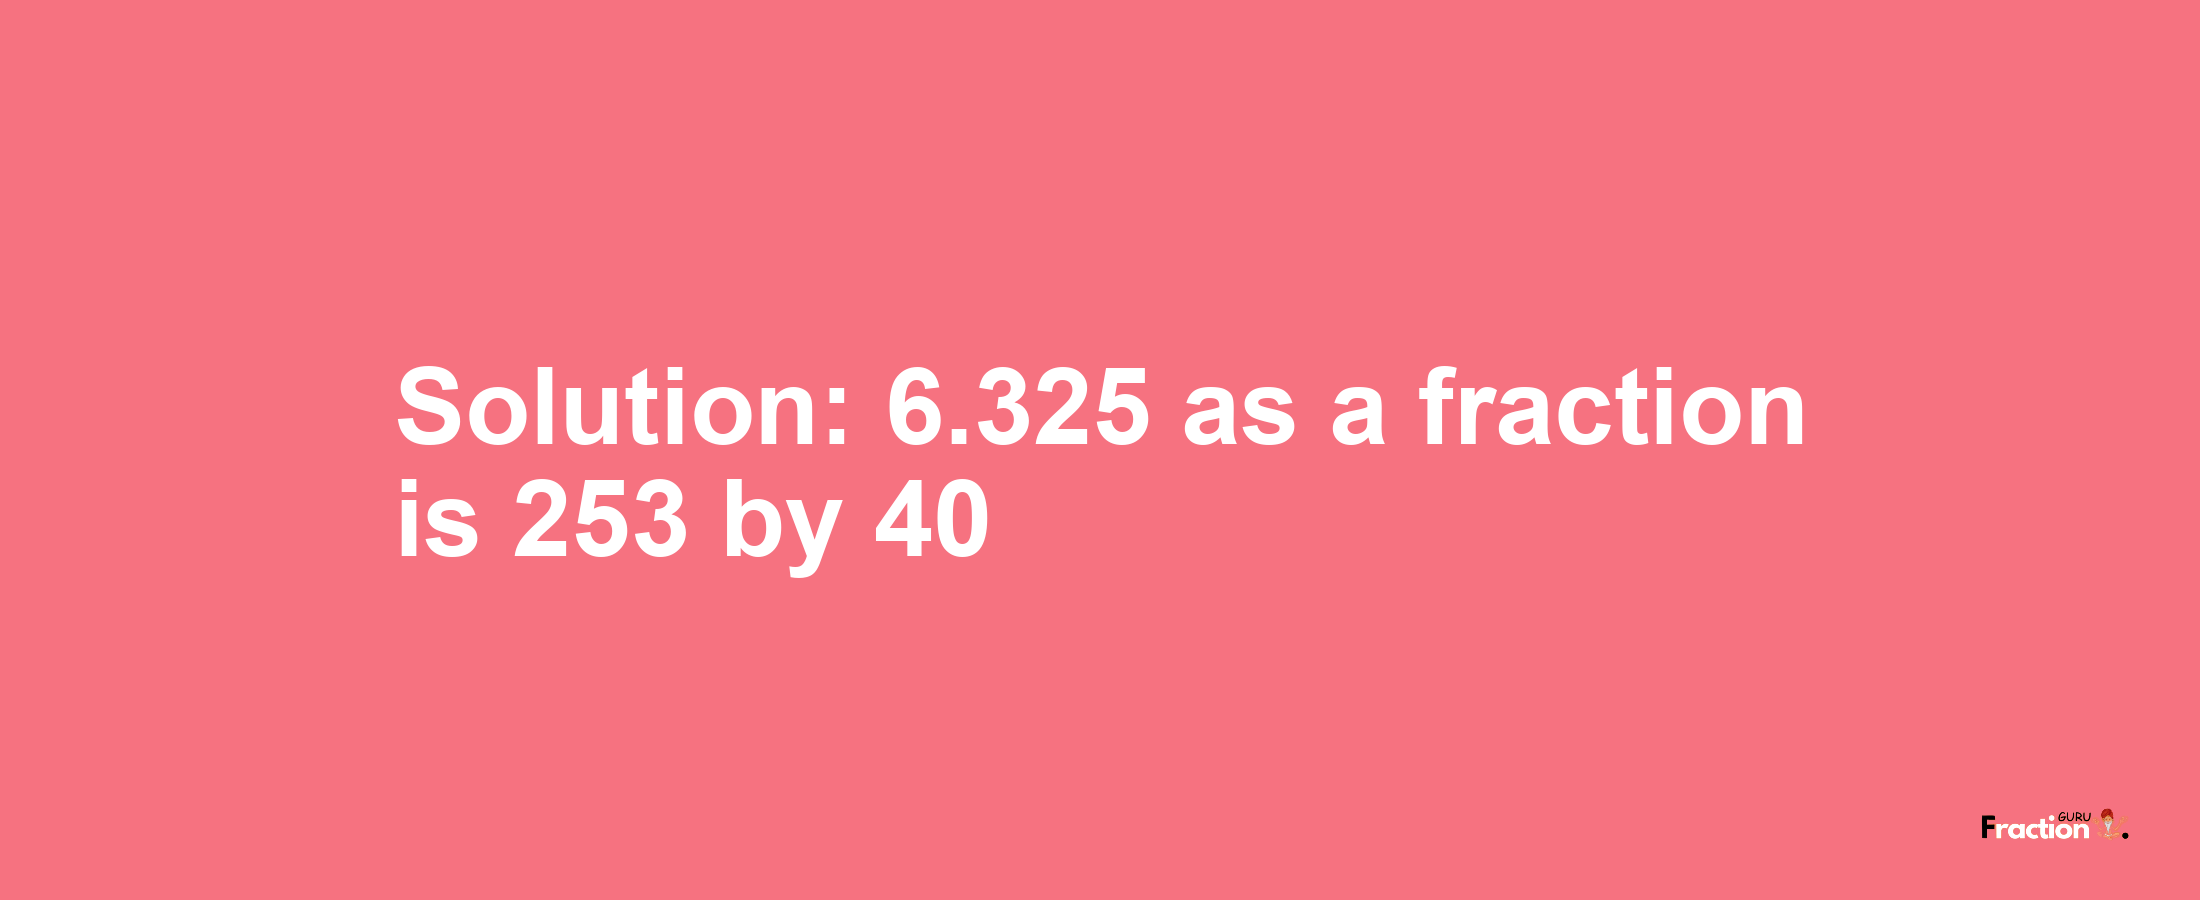 Solution:6.325 as a fraction is 253/40